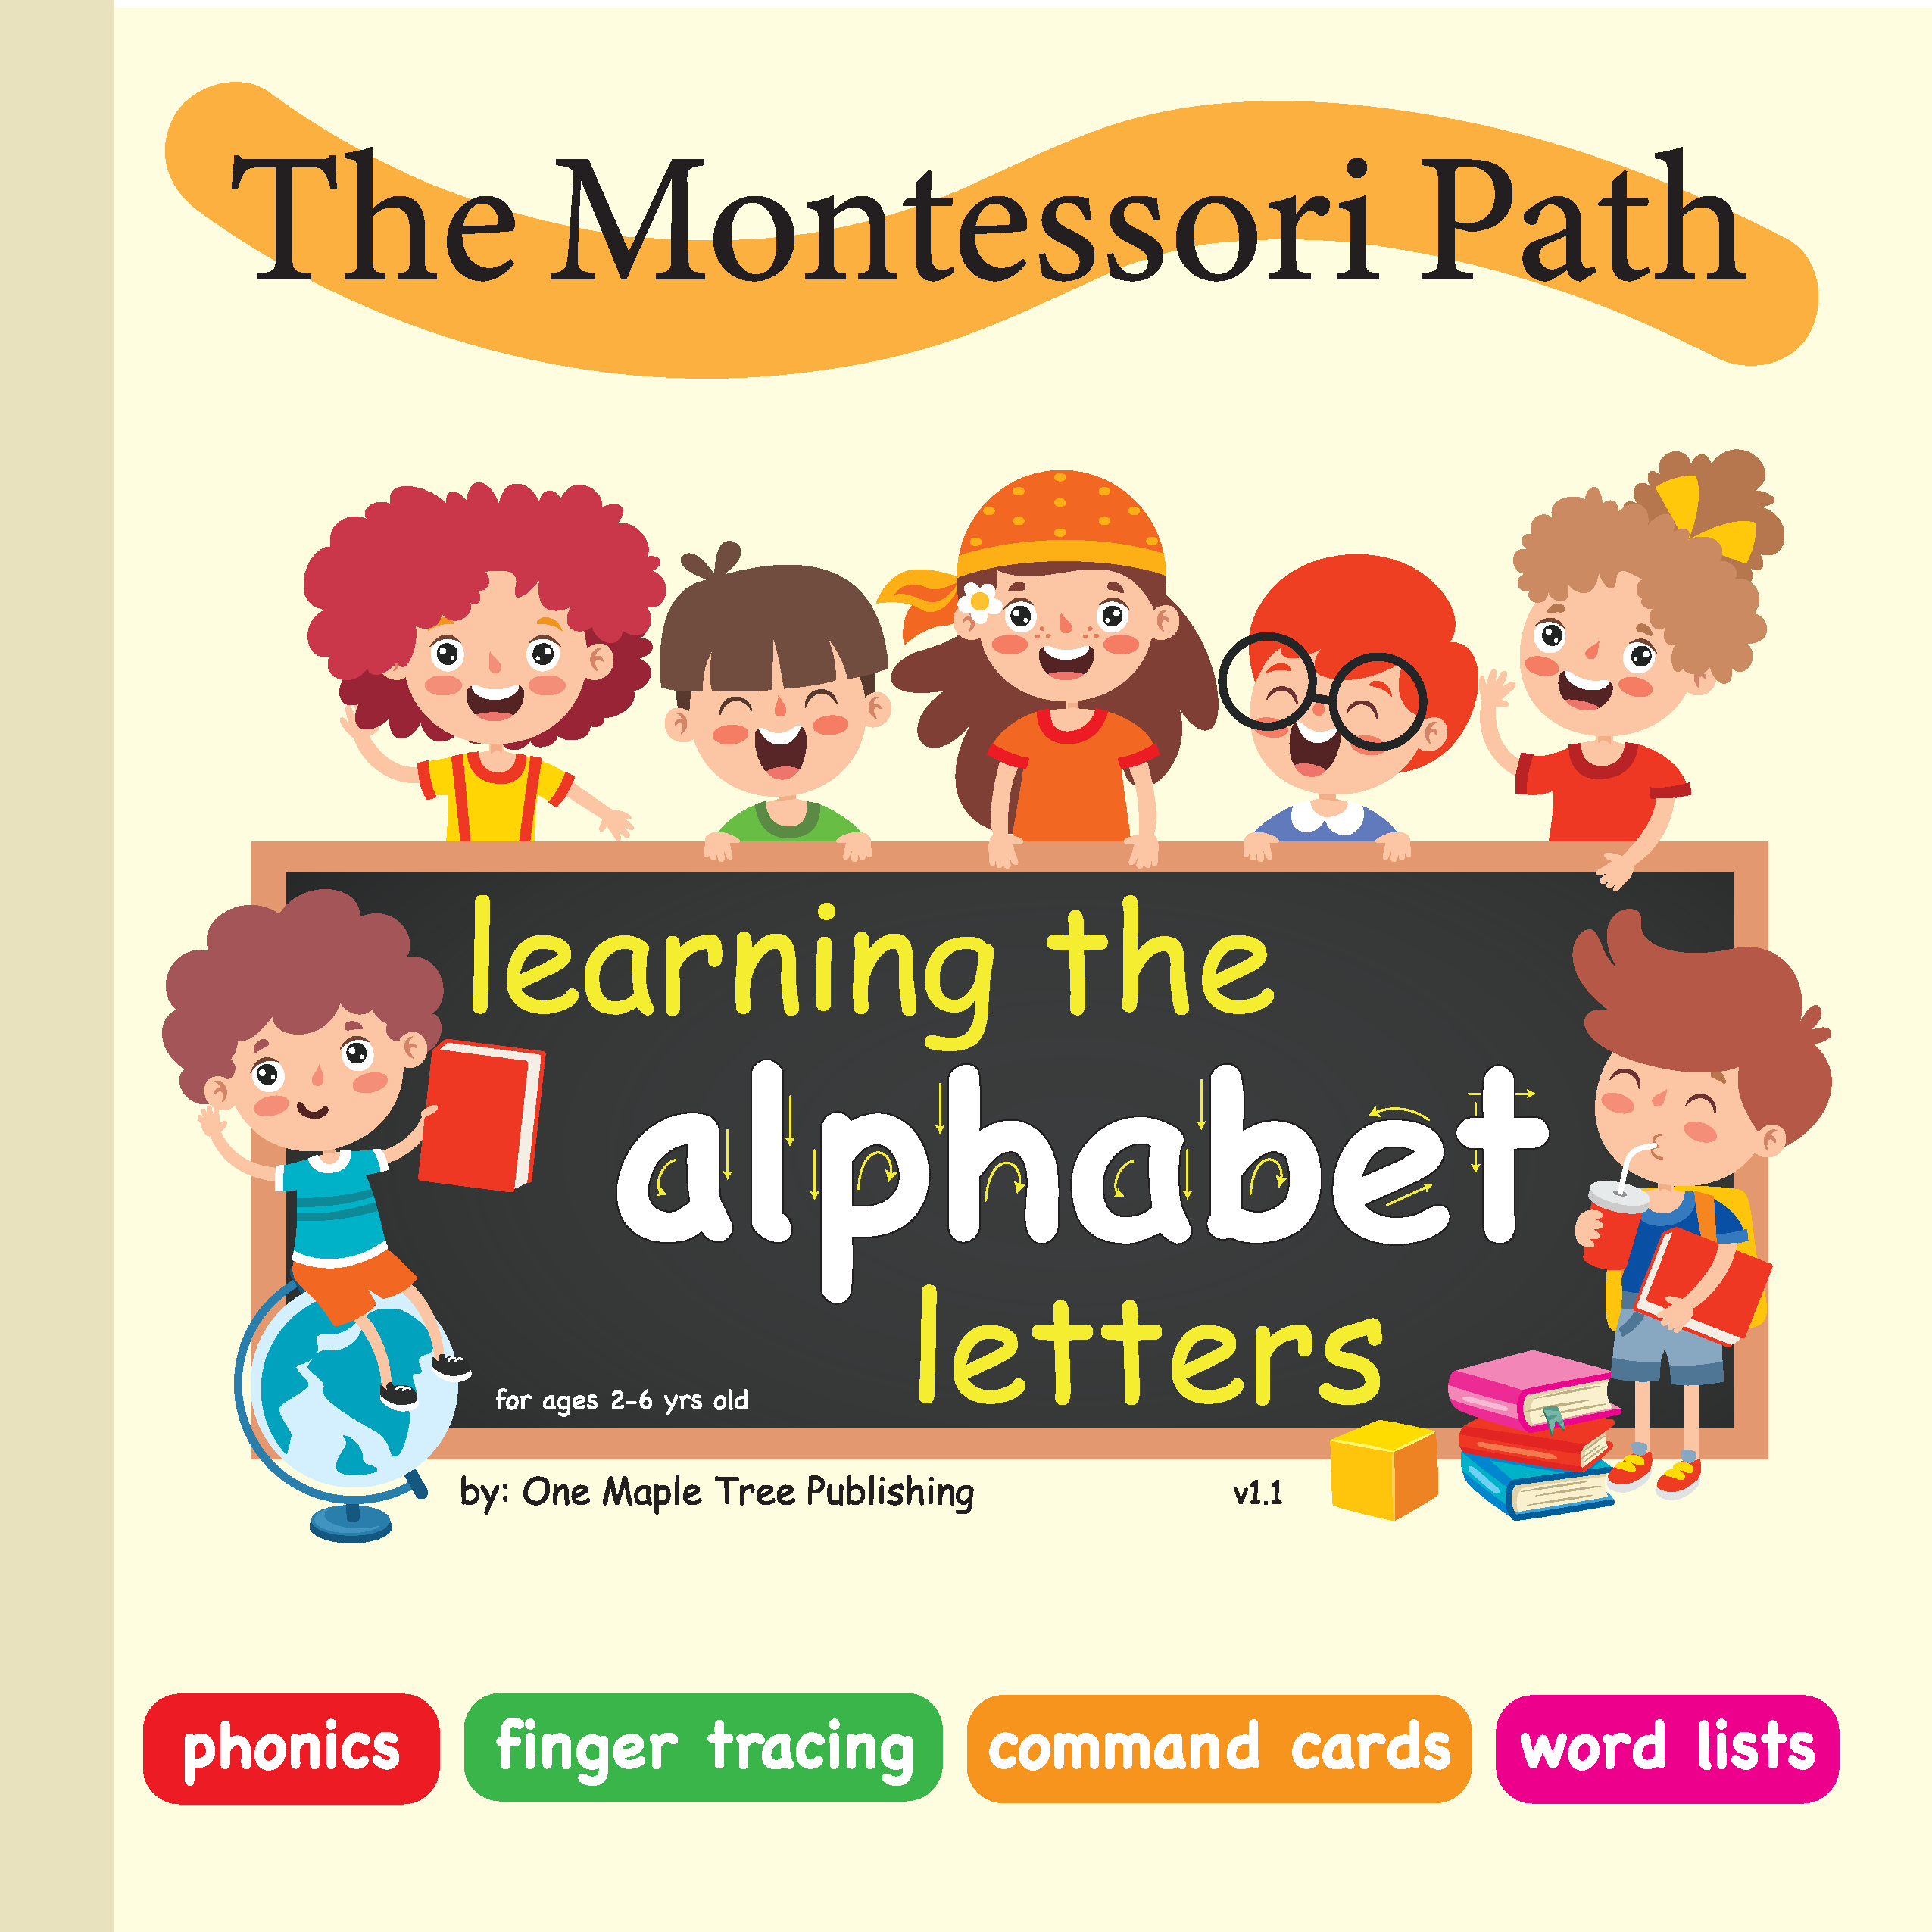 MP-Learning The Alphabet Letters